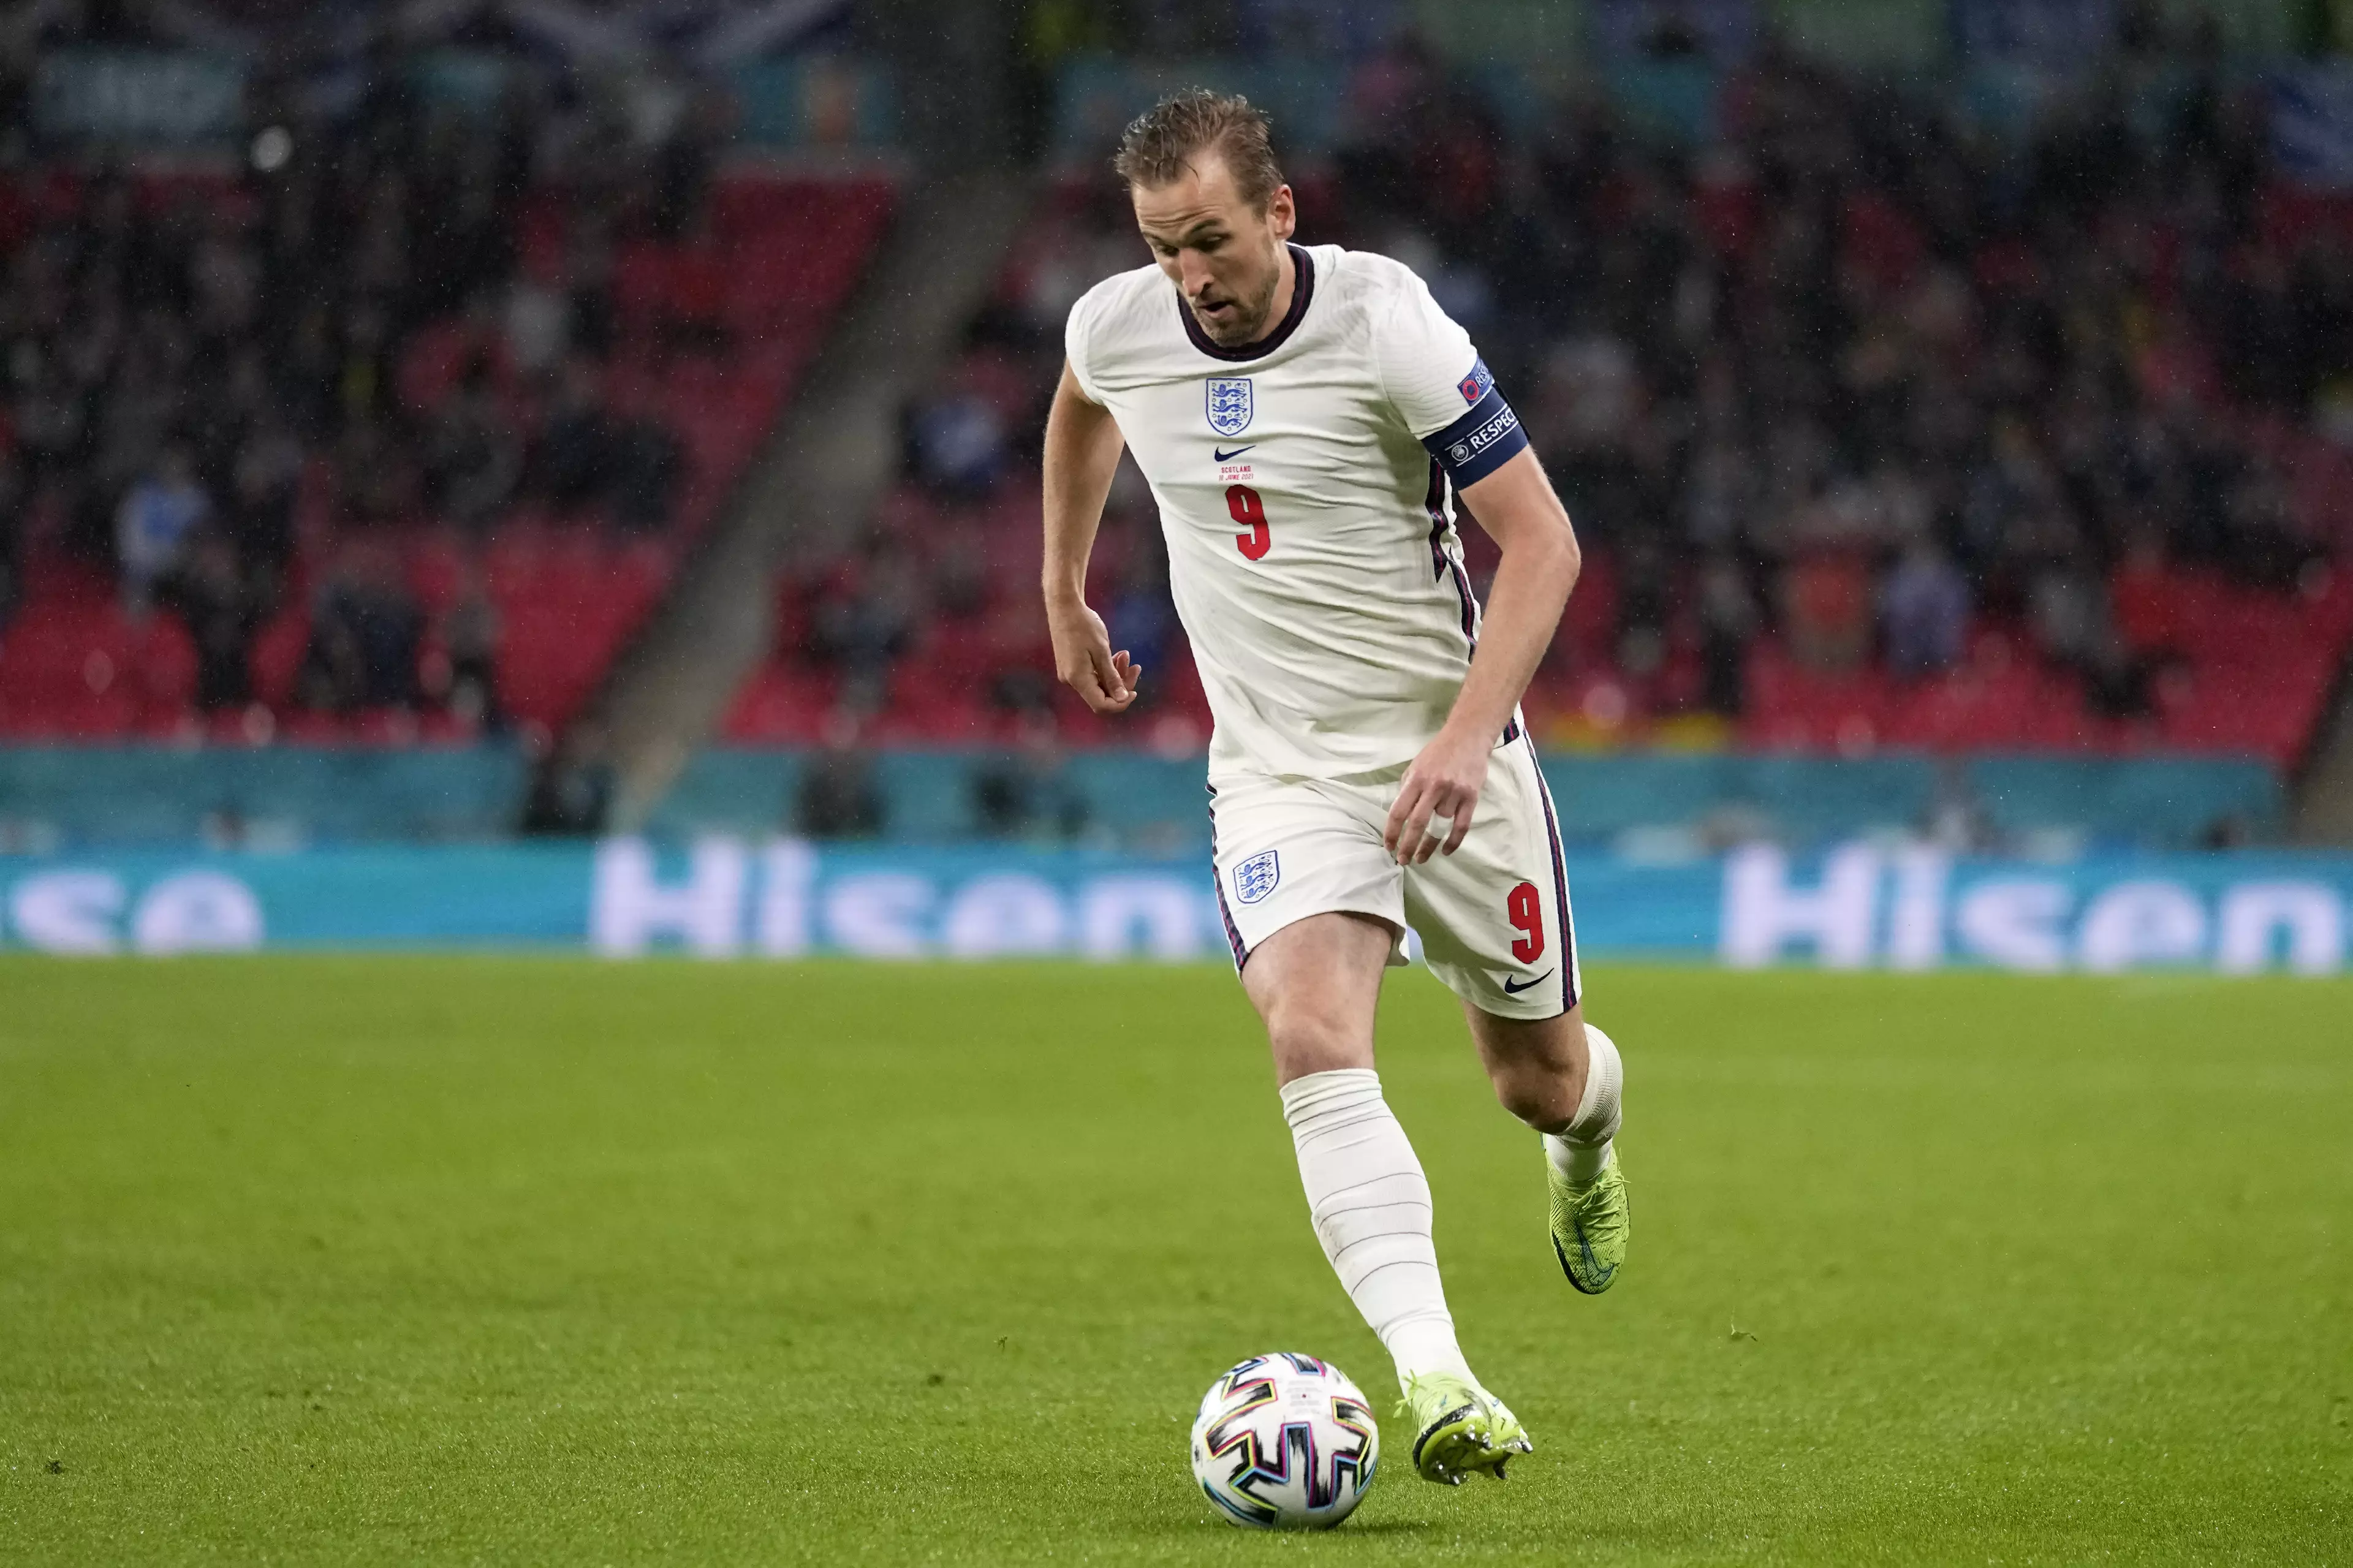 Harry Kane will be eager to open his Euro 2020 account with a goal against the Czechs